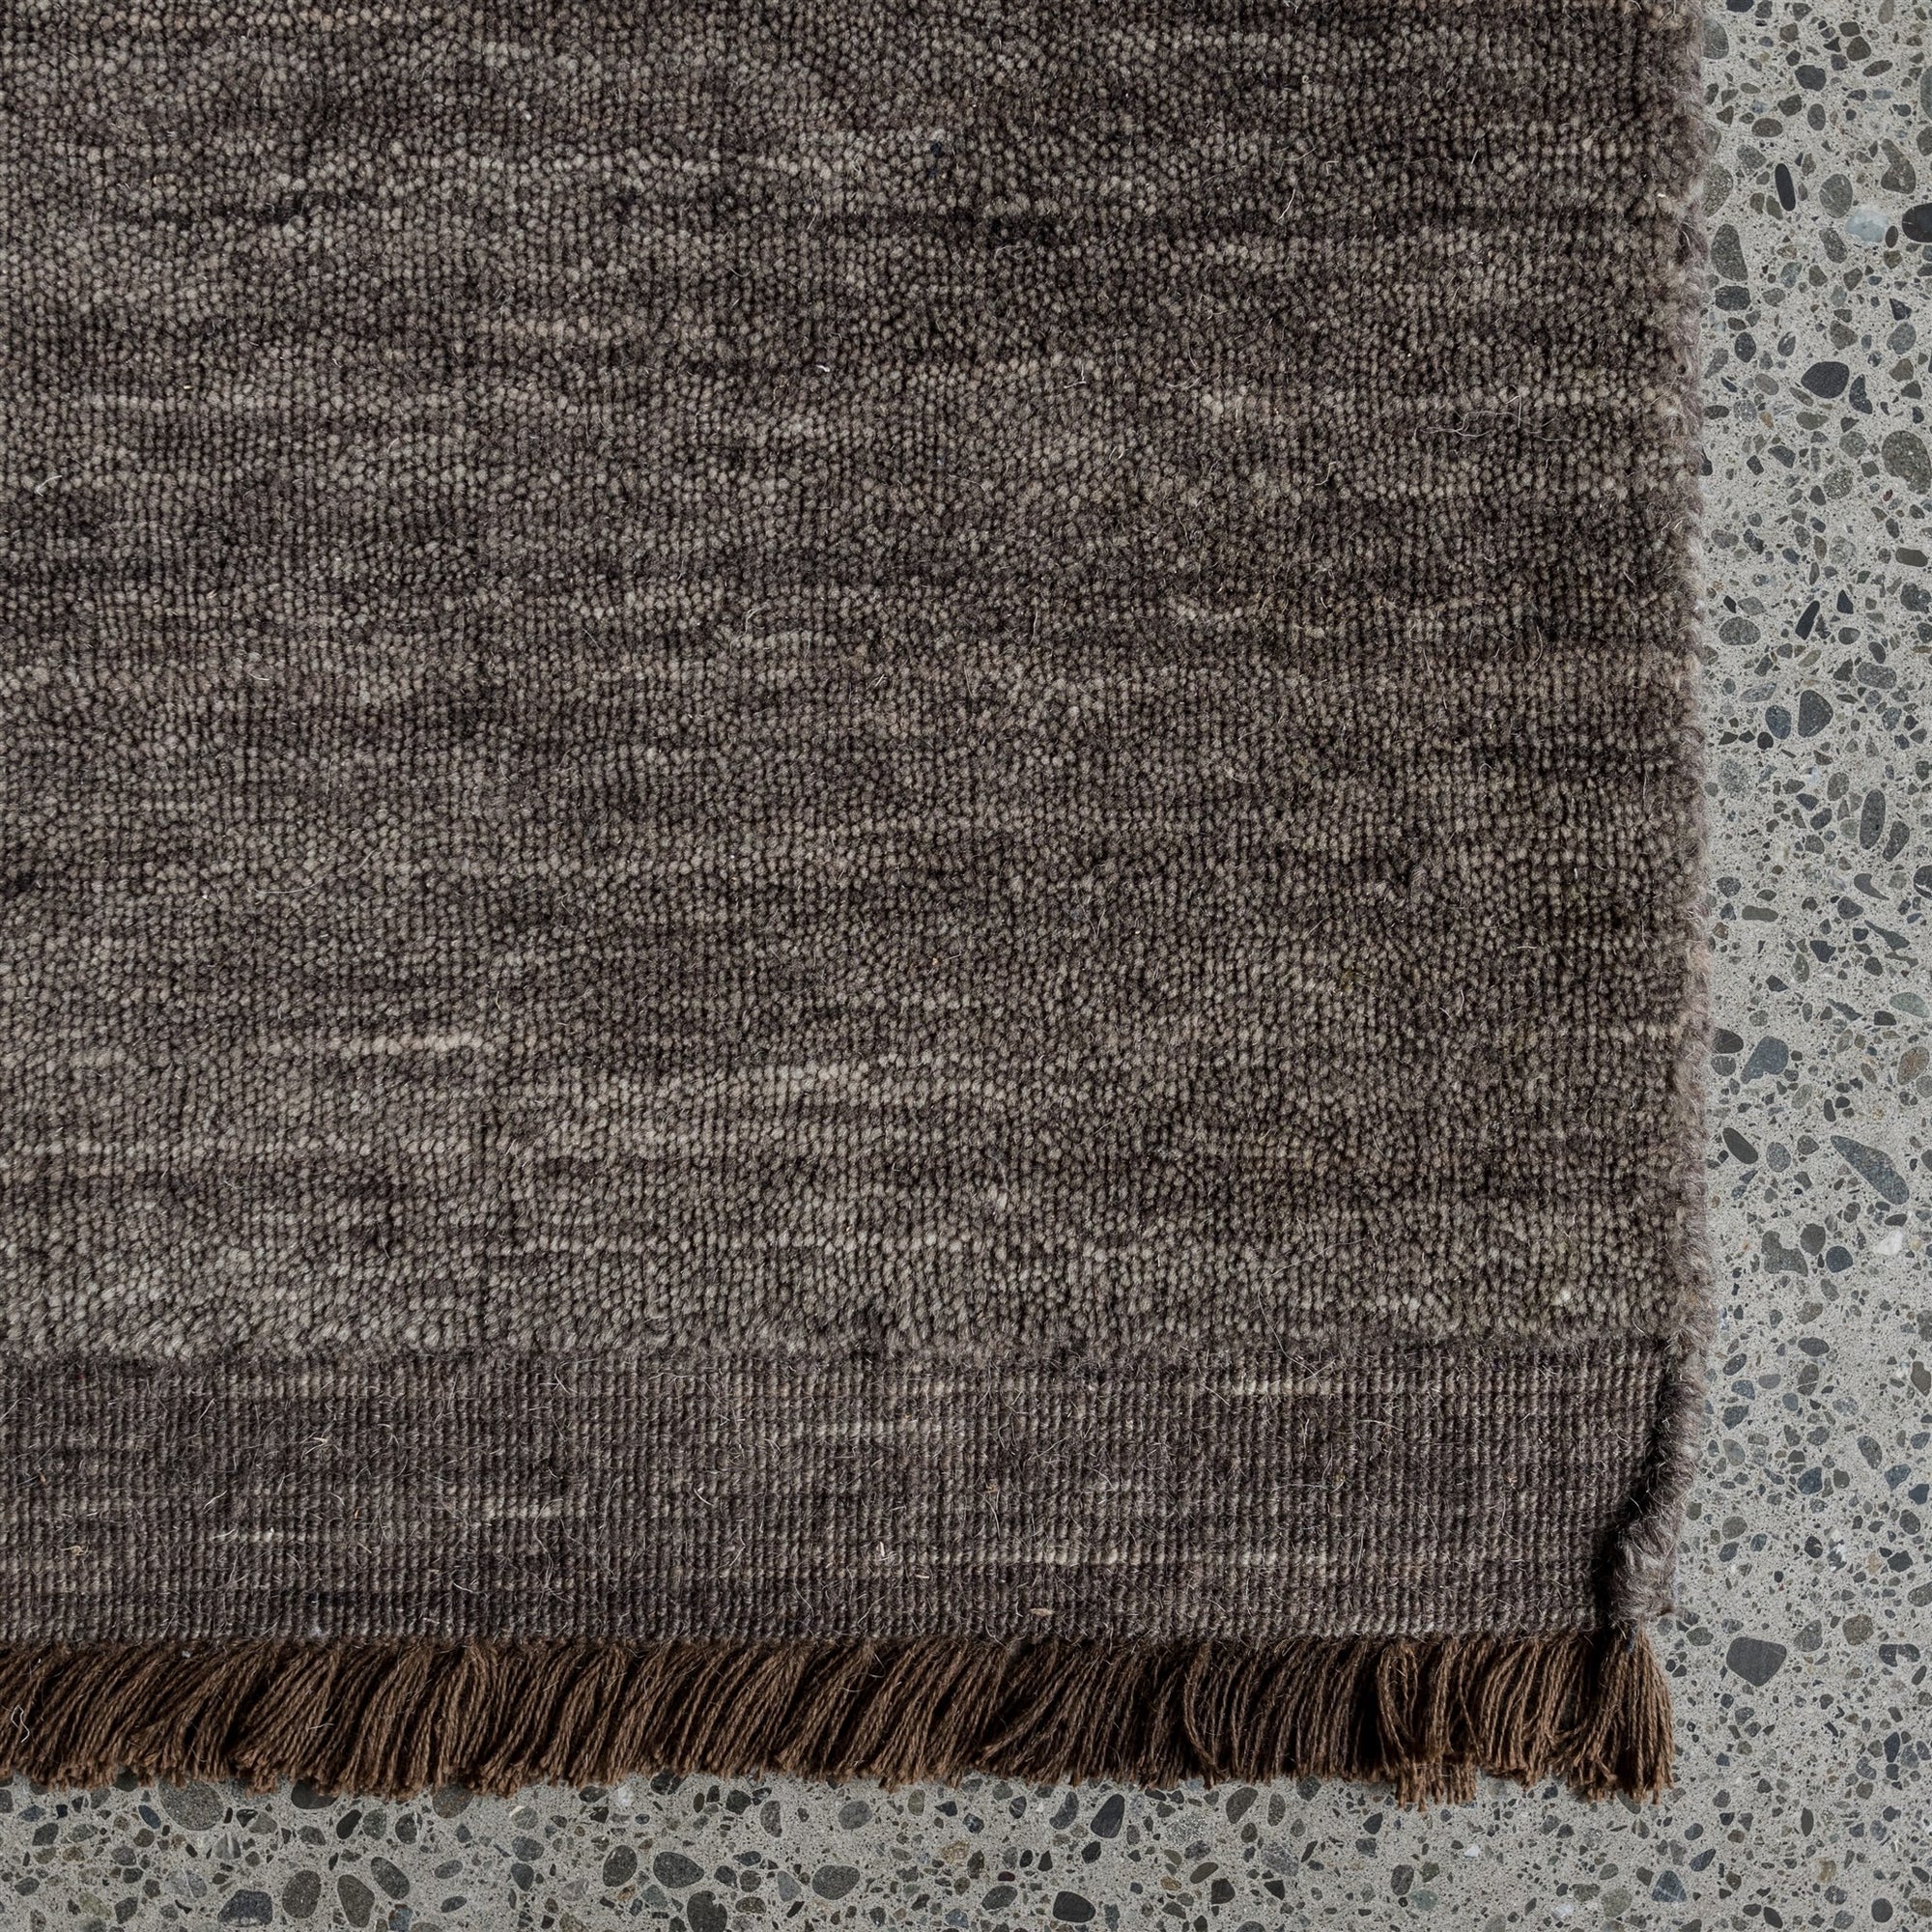 This contemporary rug is soft underfoot and rich in texture. It is finished with a sophisticated micro fringe, as shown.